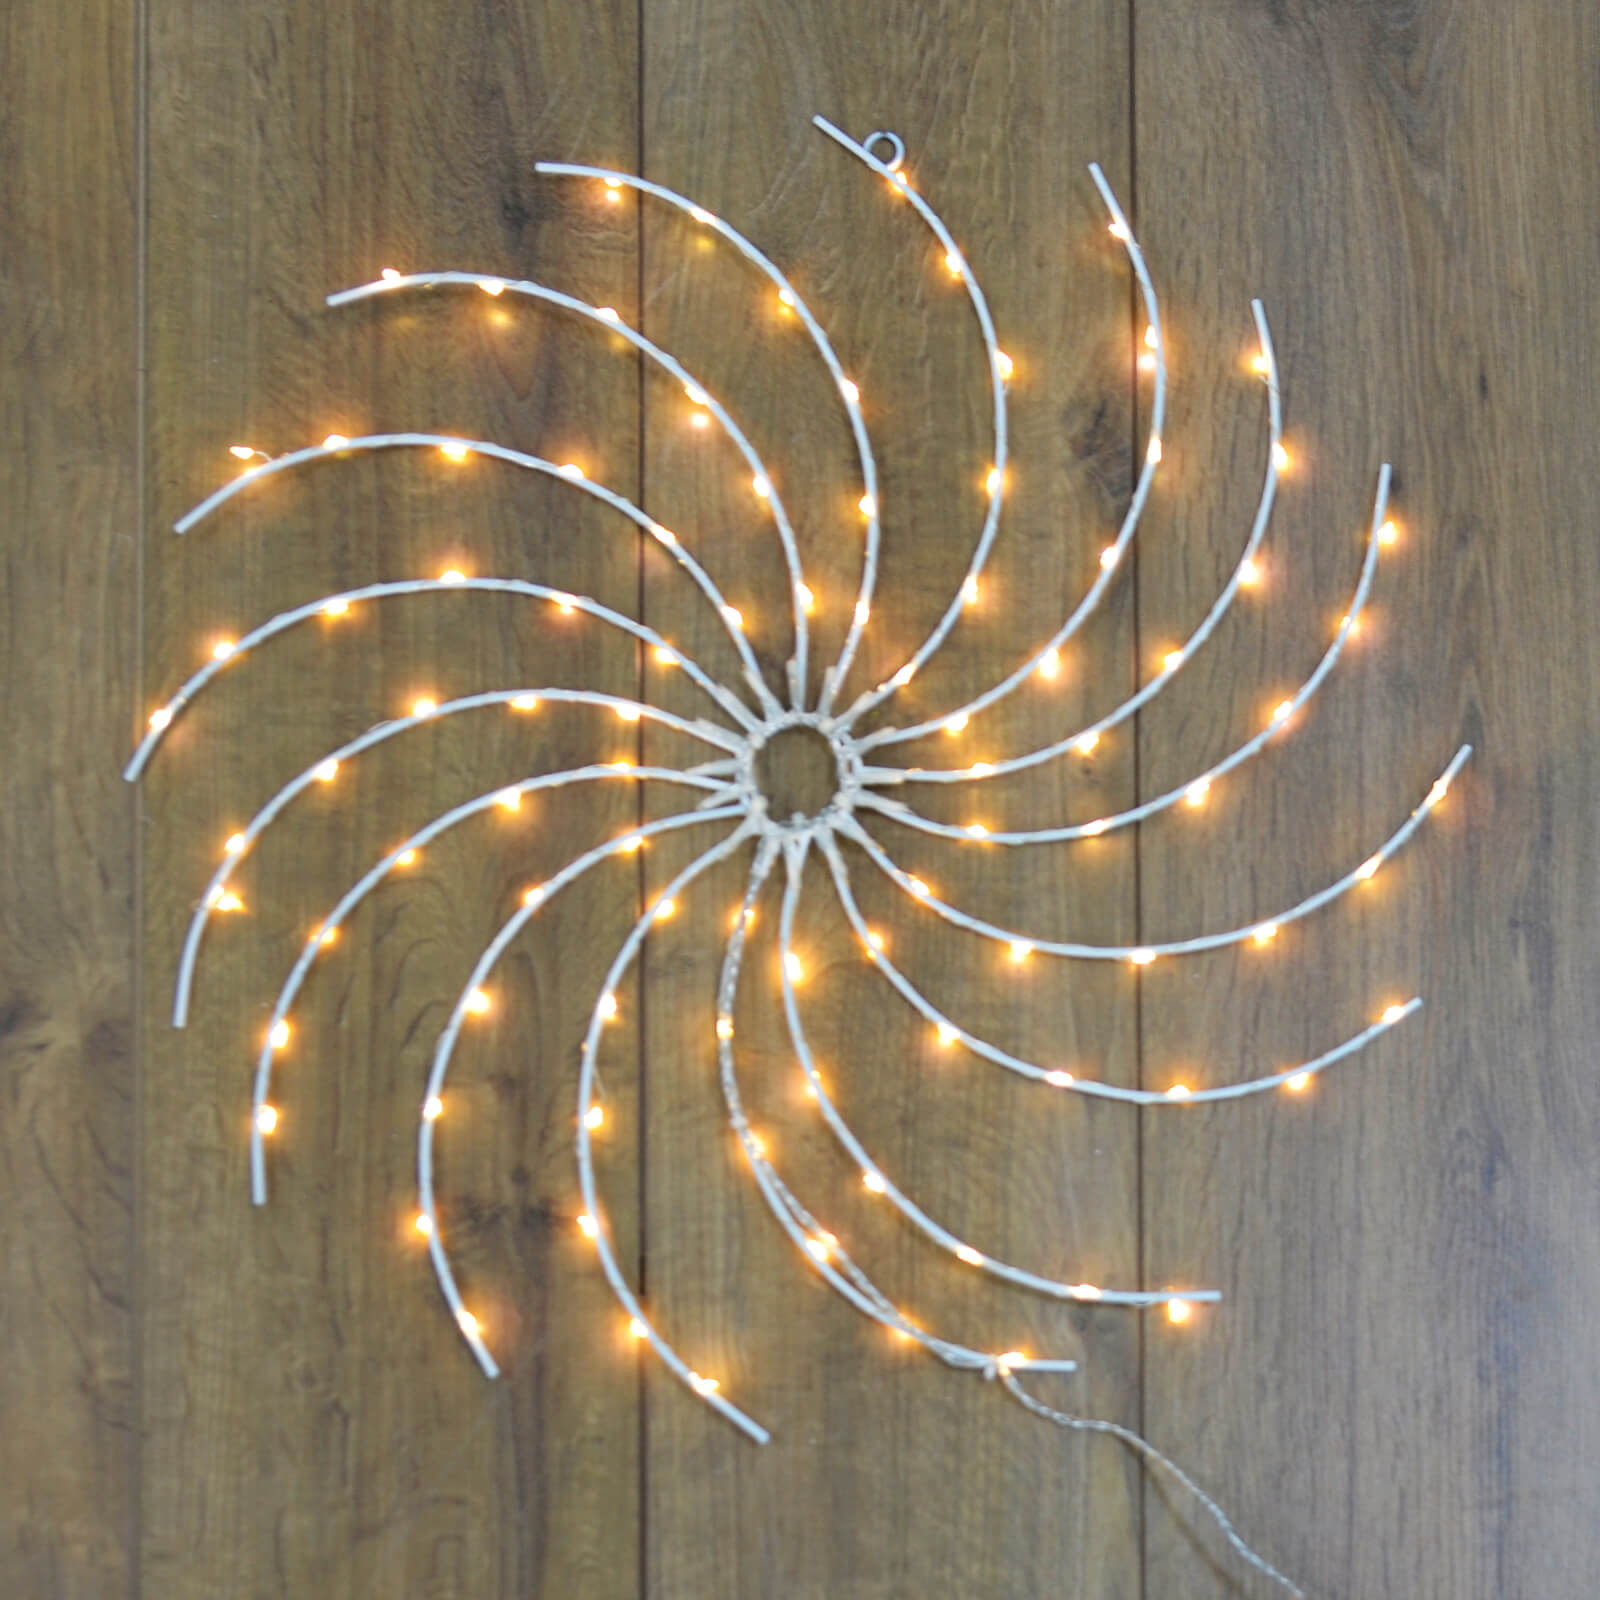 Light up swirl wheel Christmas wall decoration with warm white LED lights, hanging on a wood panelled wall